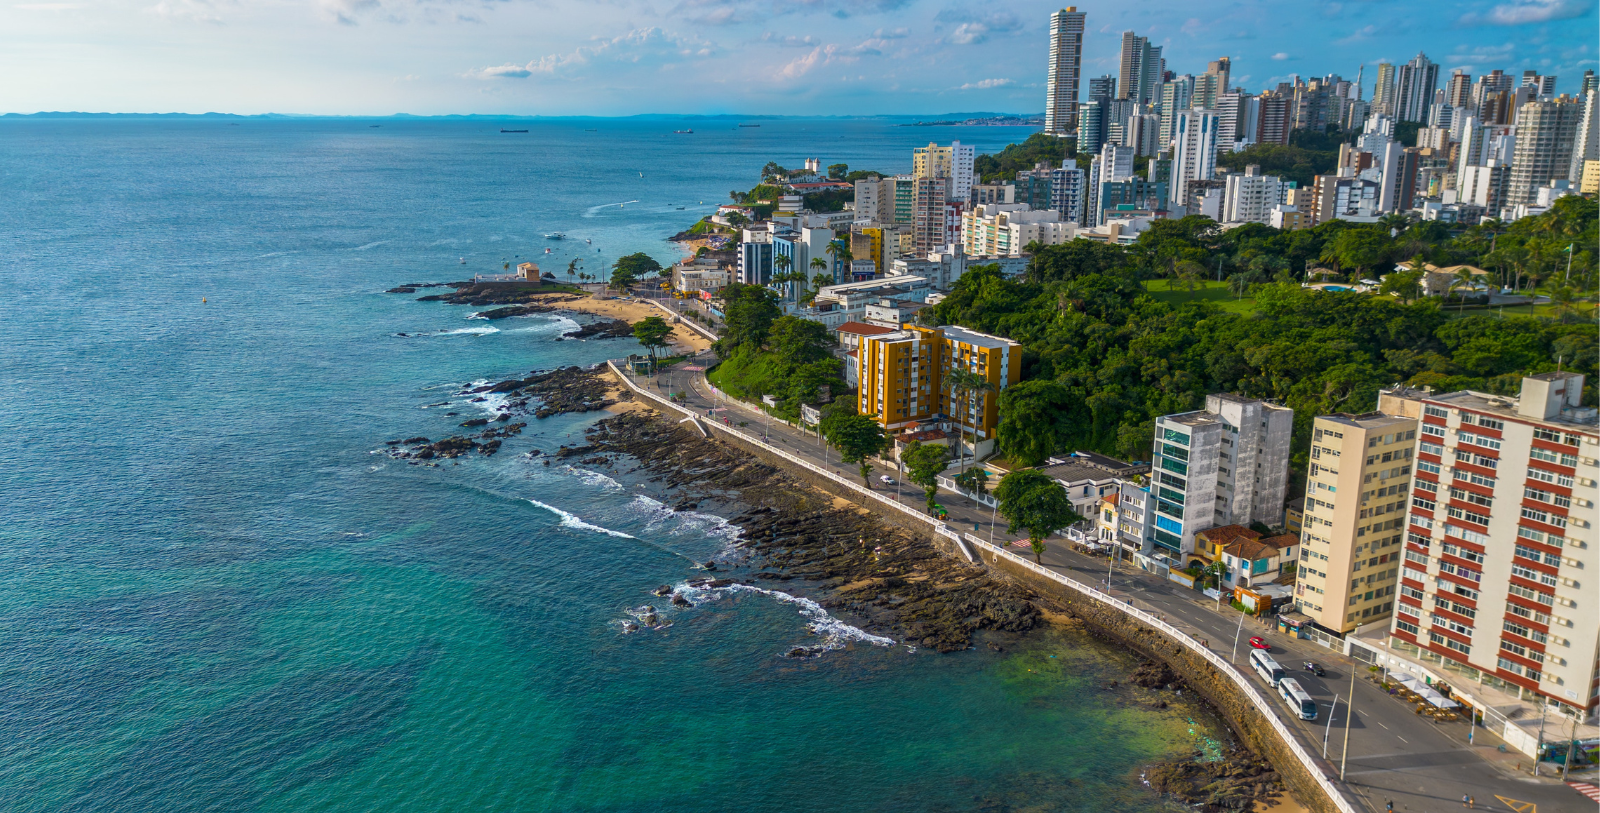 Uncover the captivating yet complicated history of Salvador de Bahia, a cultural melting pot and cradle of Afro-Brazilian heritage, as well as the first capital city of Brazil.